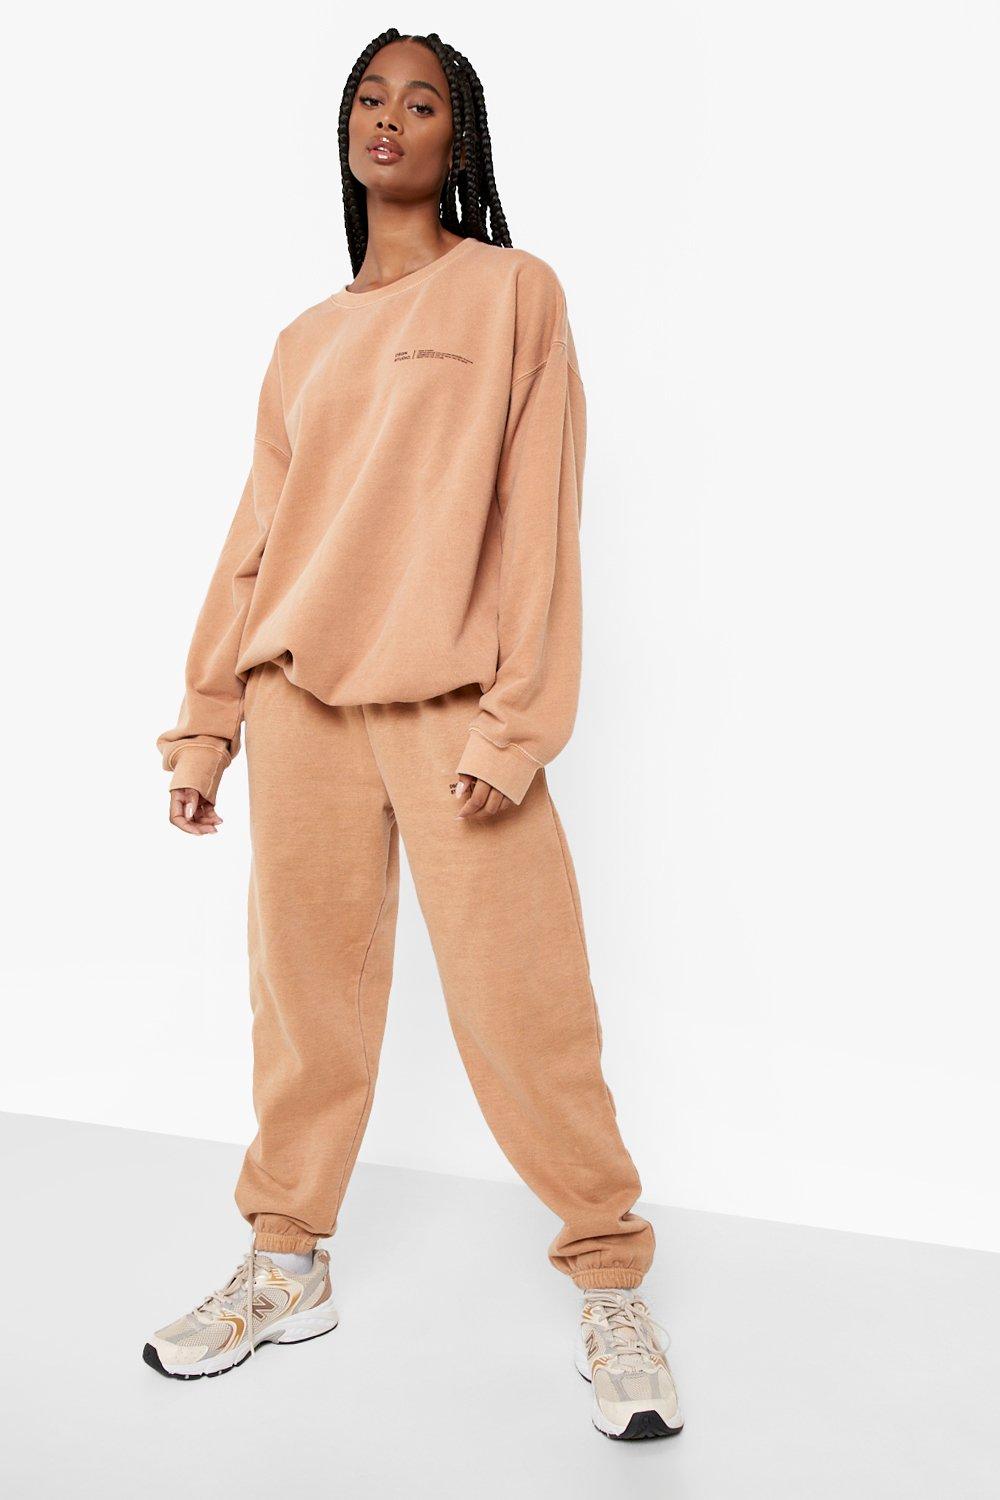 Casual Wear | Women's Casual Clothes \u0026 Casual Outfits | boohoo UK